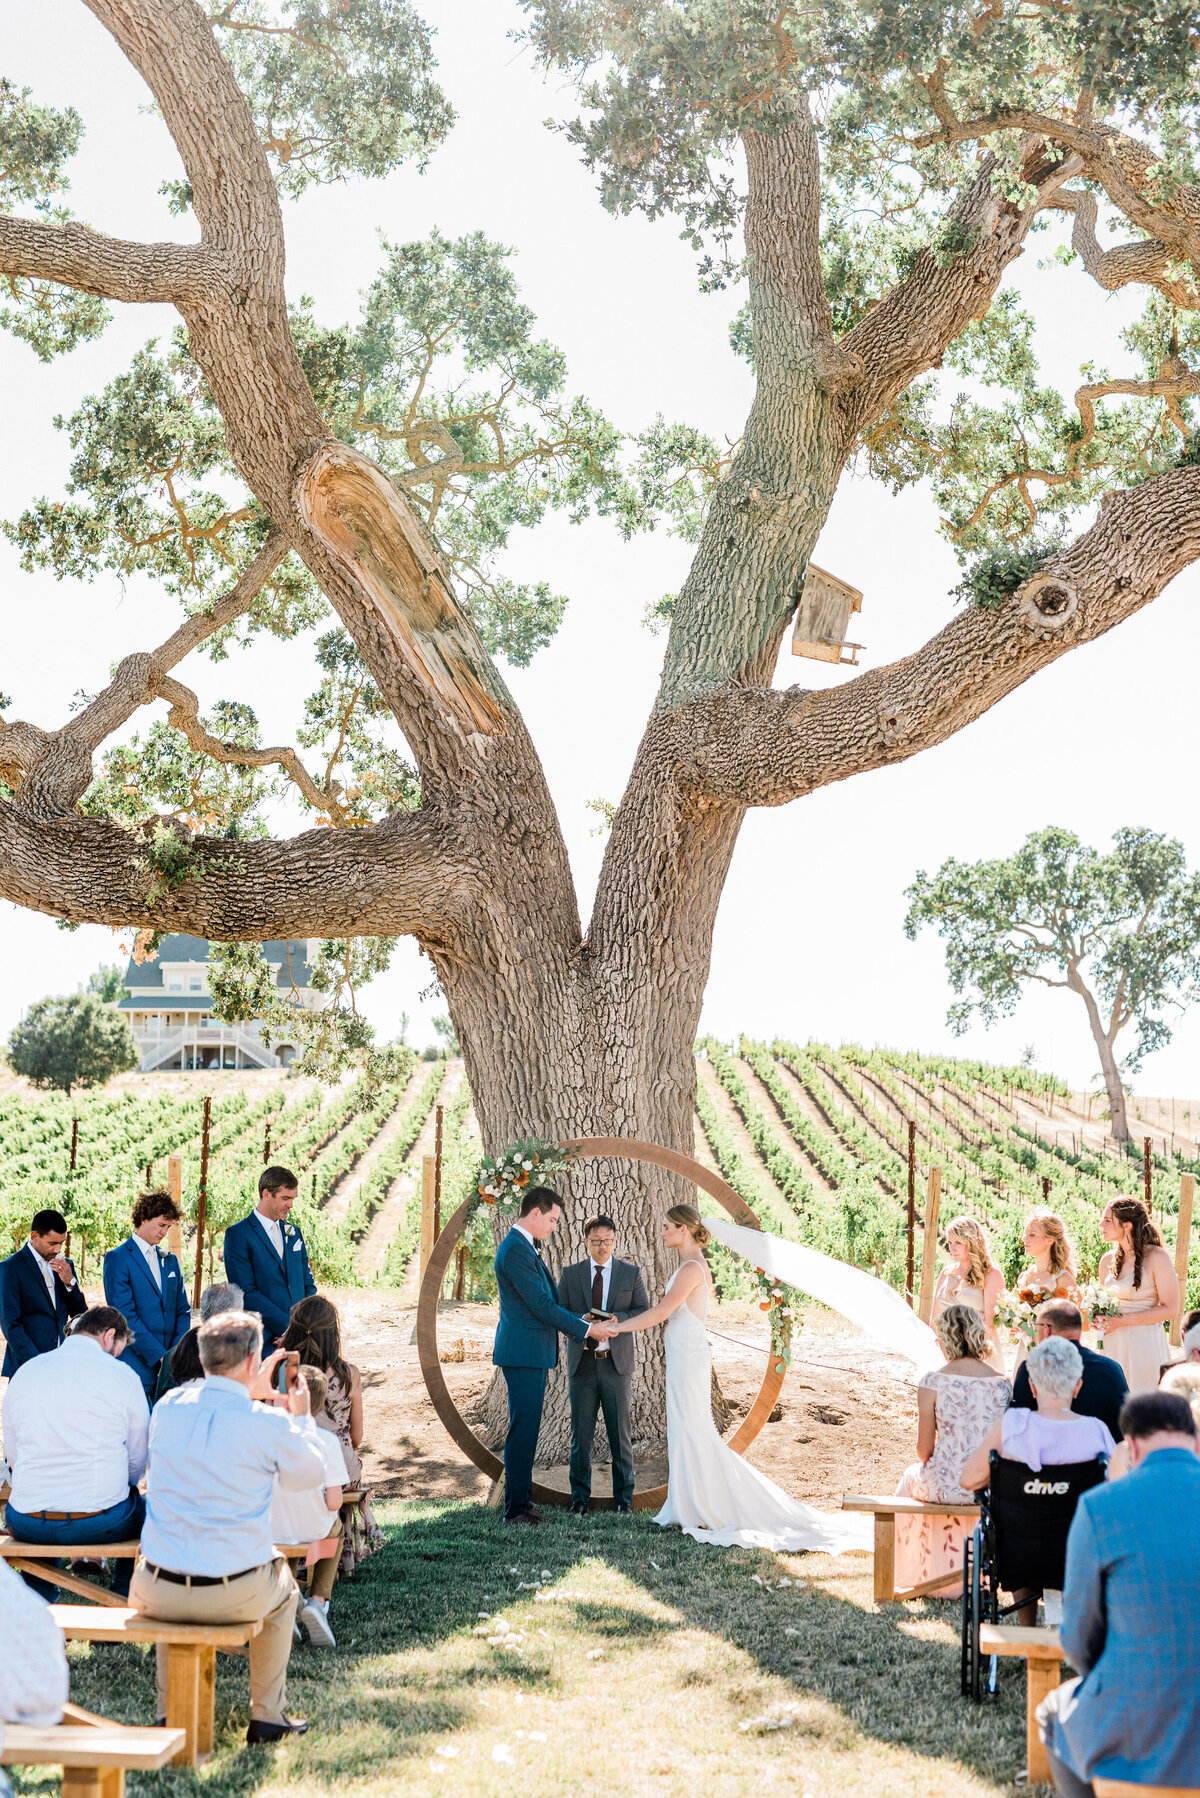 Bride and groom during their wedding ceremony under giant oak tree at Ella's Vineyard in San Luis Obispo, while guests watch as they say their vows.